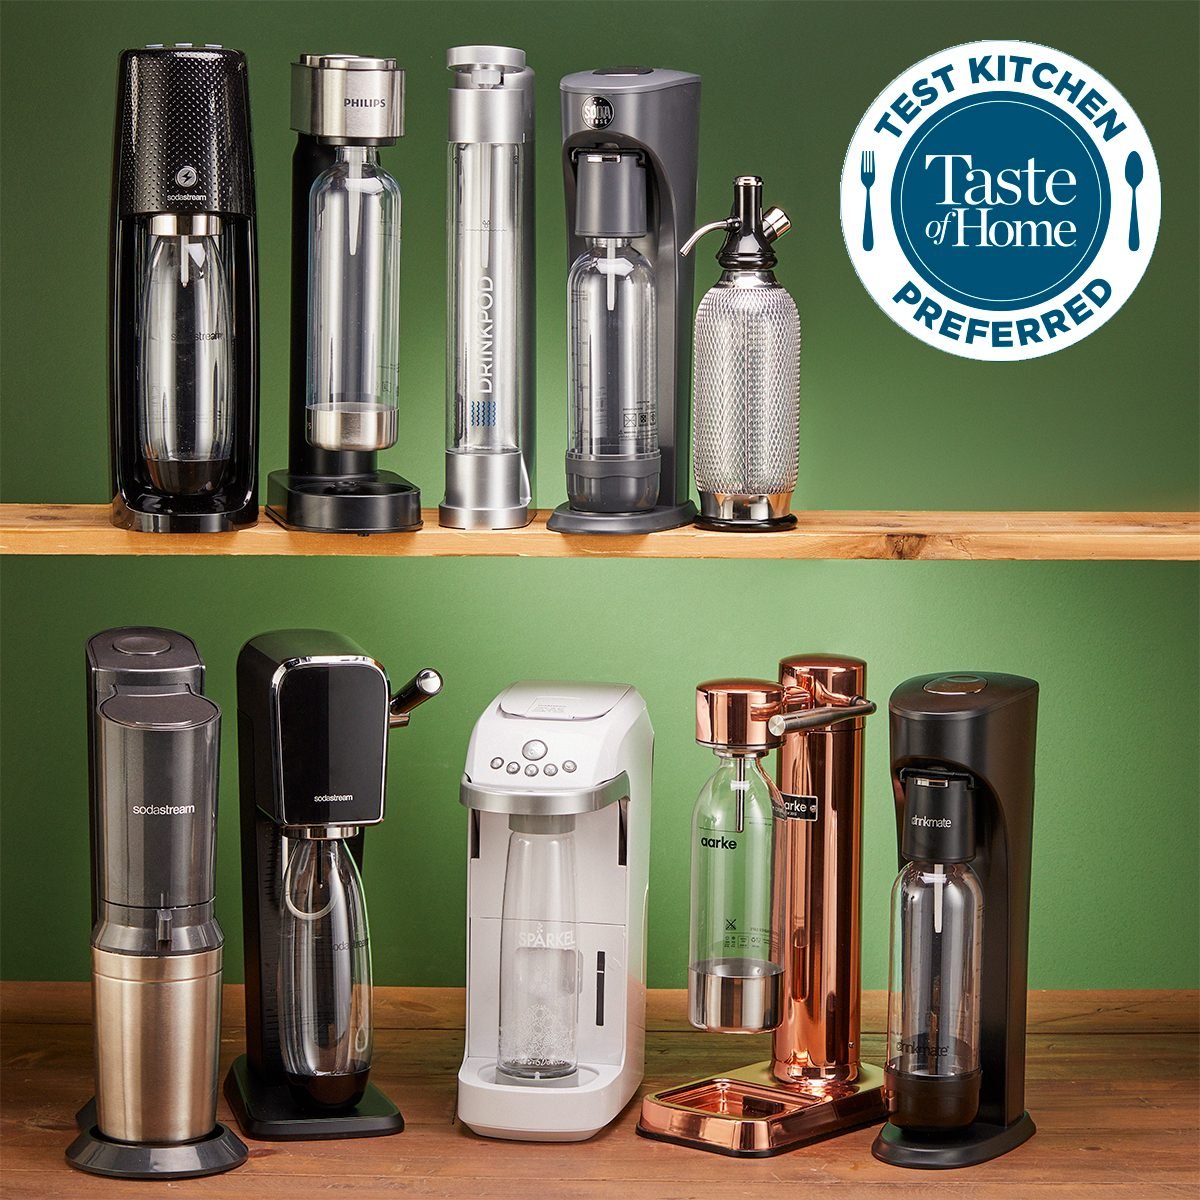 Sodastream review - Is it worth it? — Smartblend